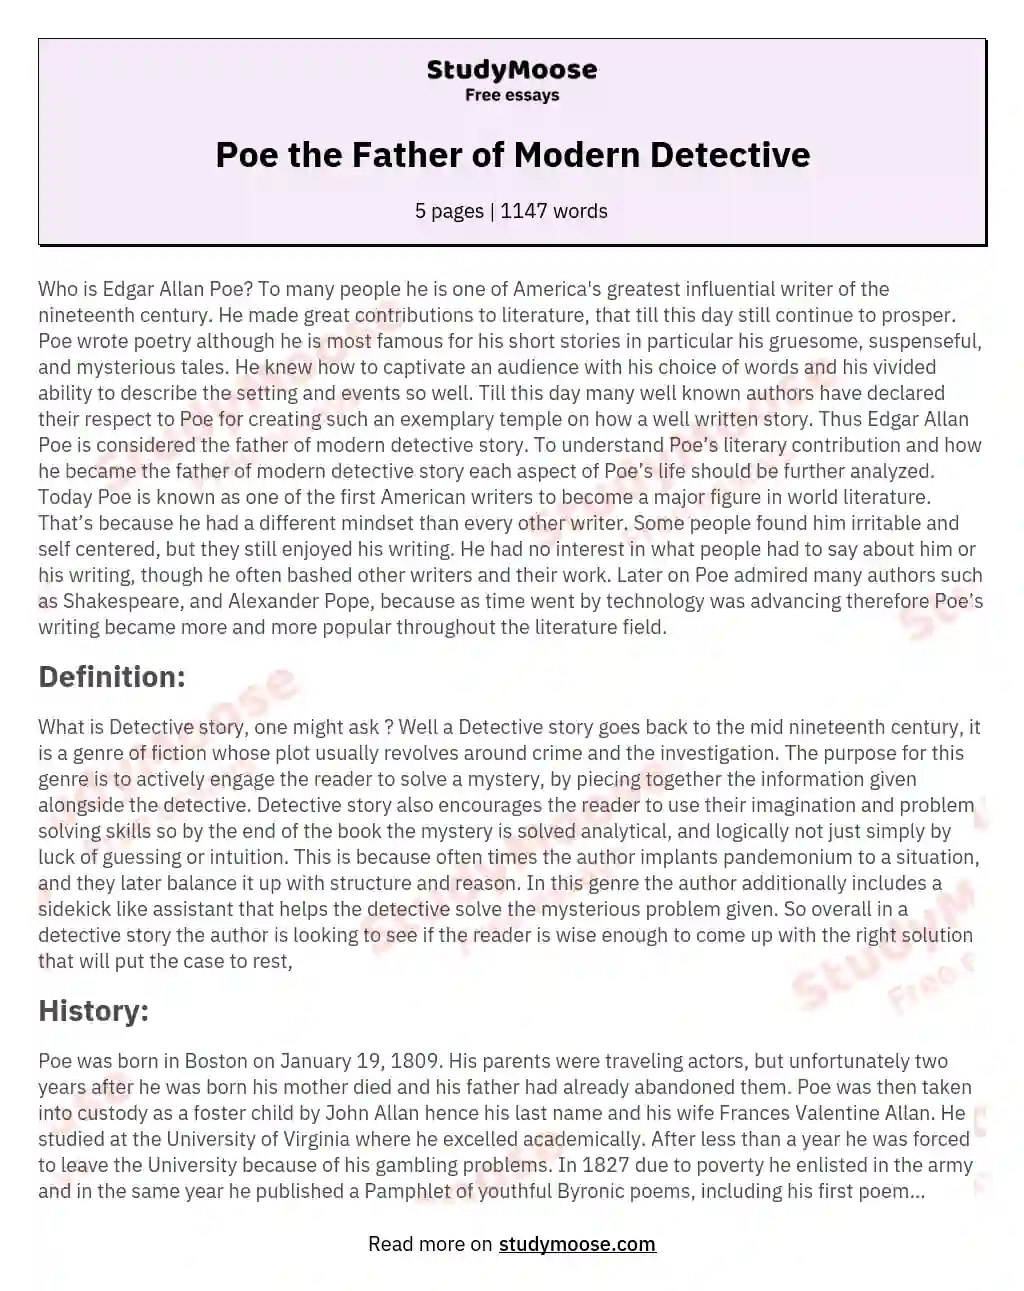 Poe the Father of Modern Detective essay